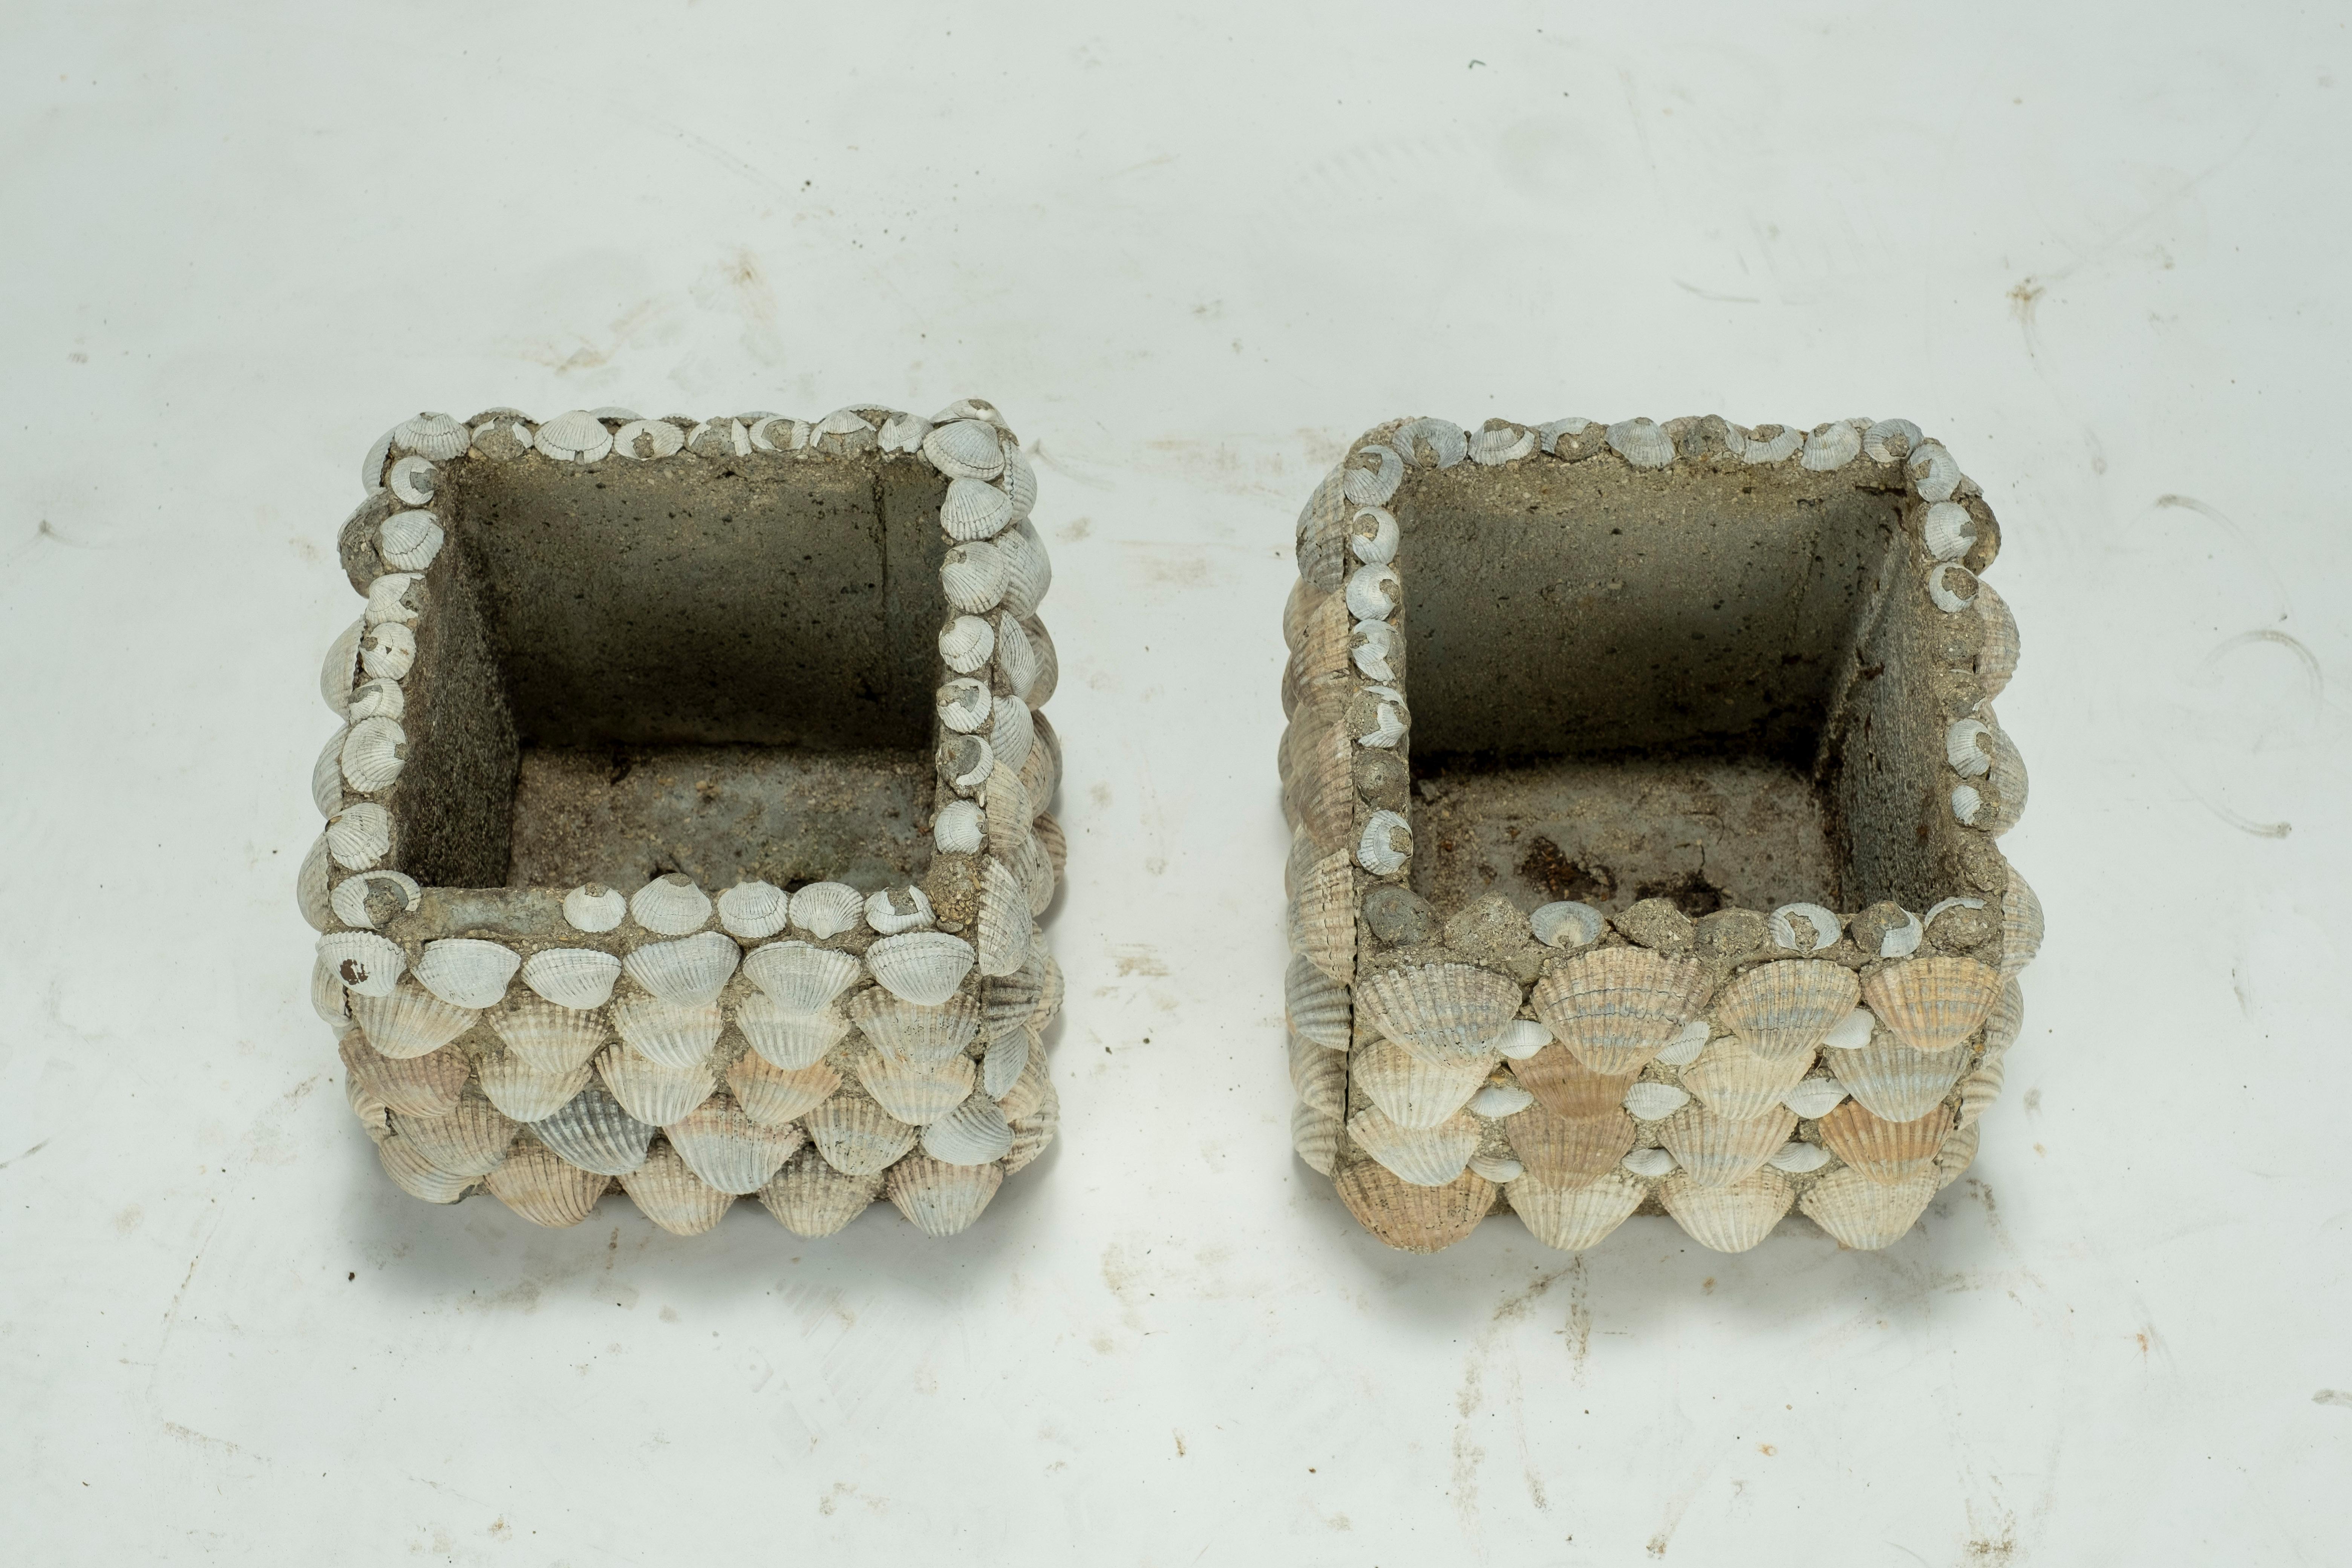 Pair of square Seashell planters adorned with shells from the Cliffs of Dover. A few of the shells have broken.